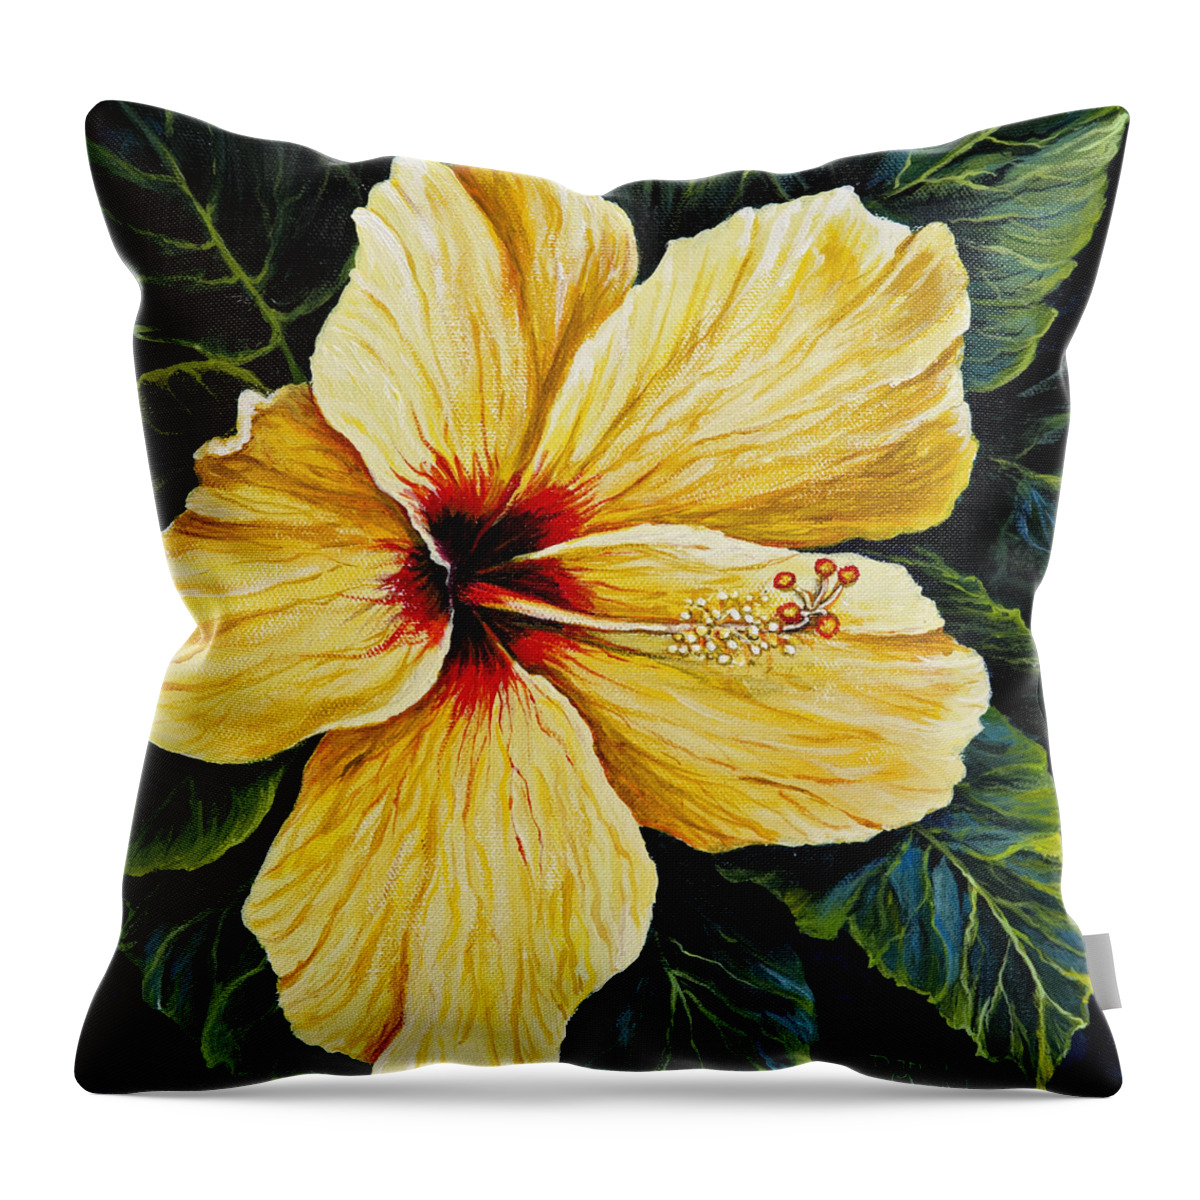 Flower Throw Pillow featuring the painting Yellow Hibiscus by Darice Machel McGuire